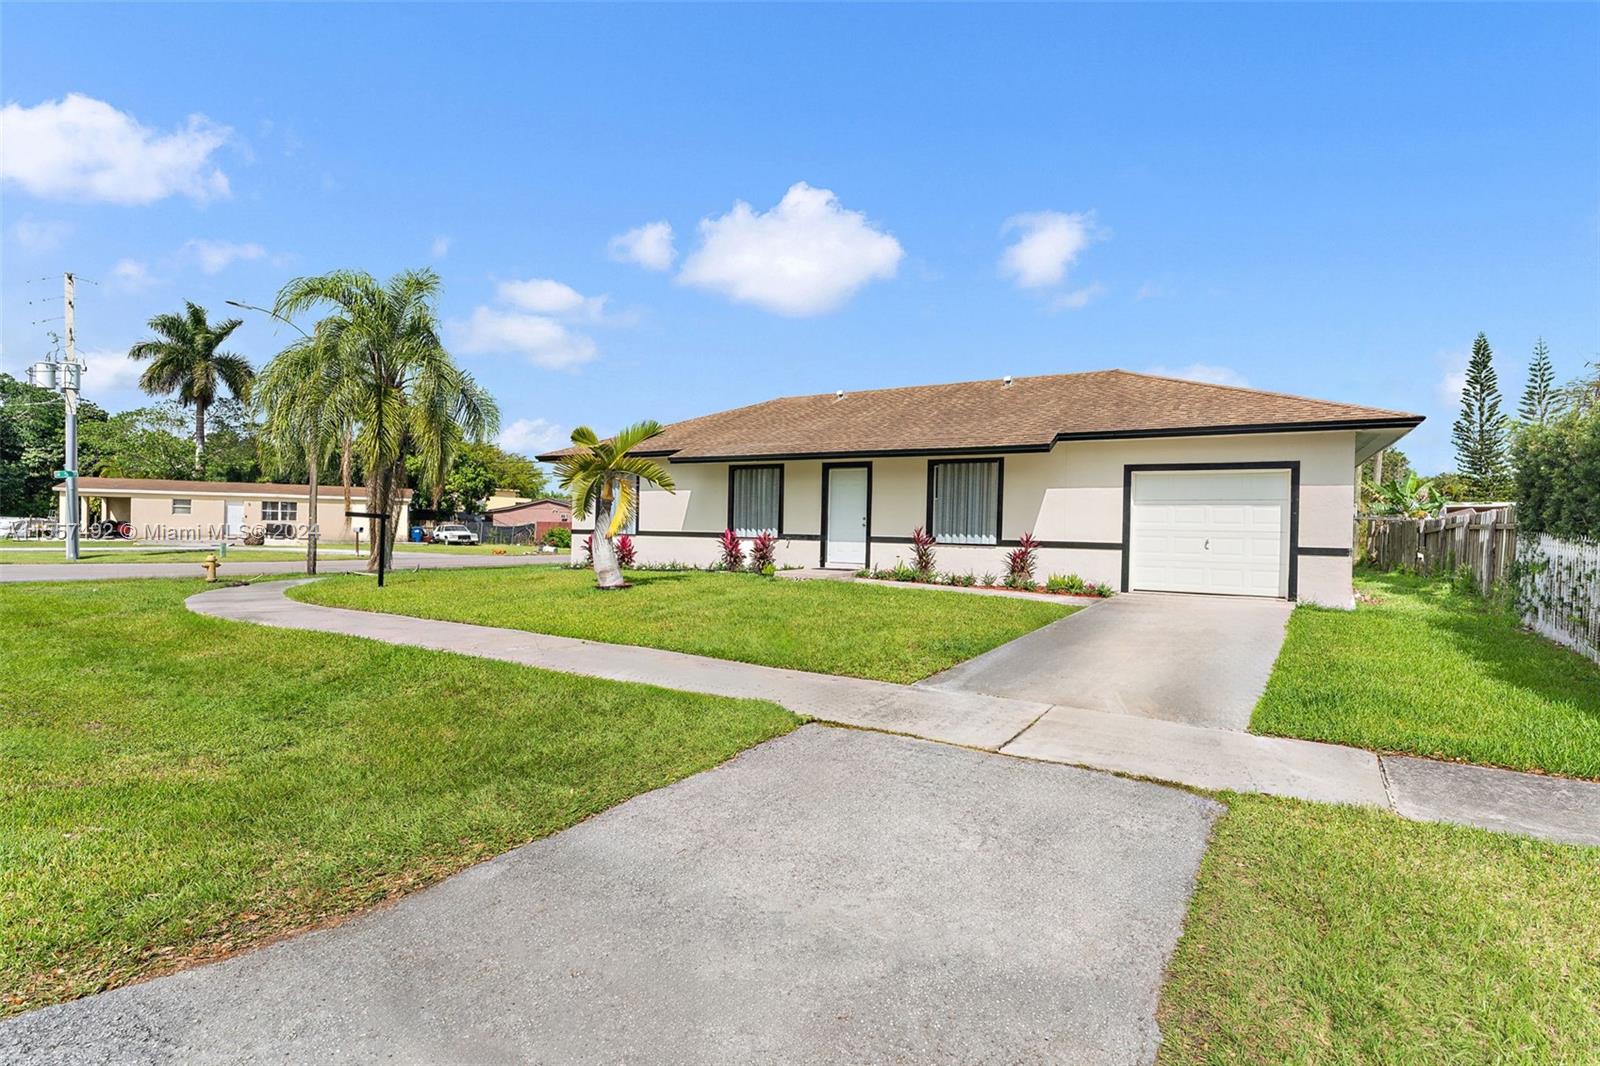 Completely renovated, 3bedroom, 2 bathroom, corner lot. 1 car garage, with a driveway. Great Area in Florida City. Appliances are brand new, great sized rooms and bathrooms. Custom Kitchen Cabinets, island with cook top and microwave.